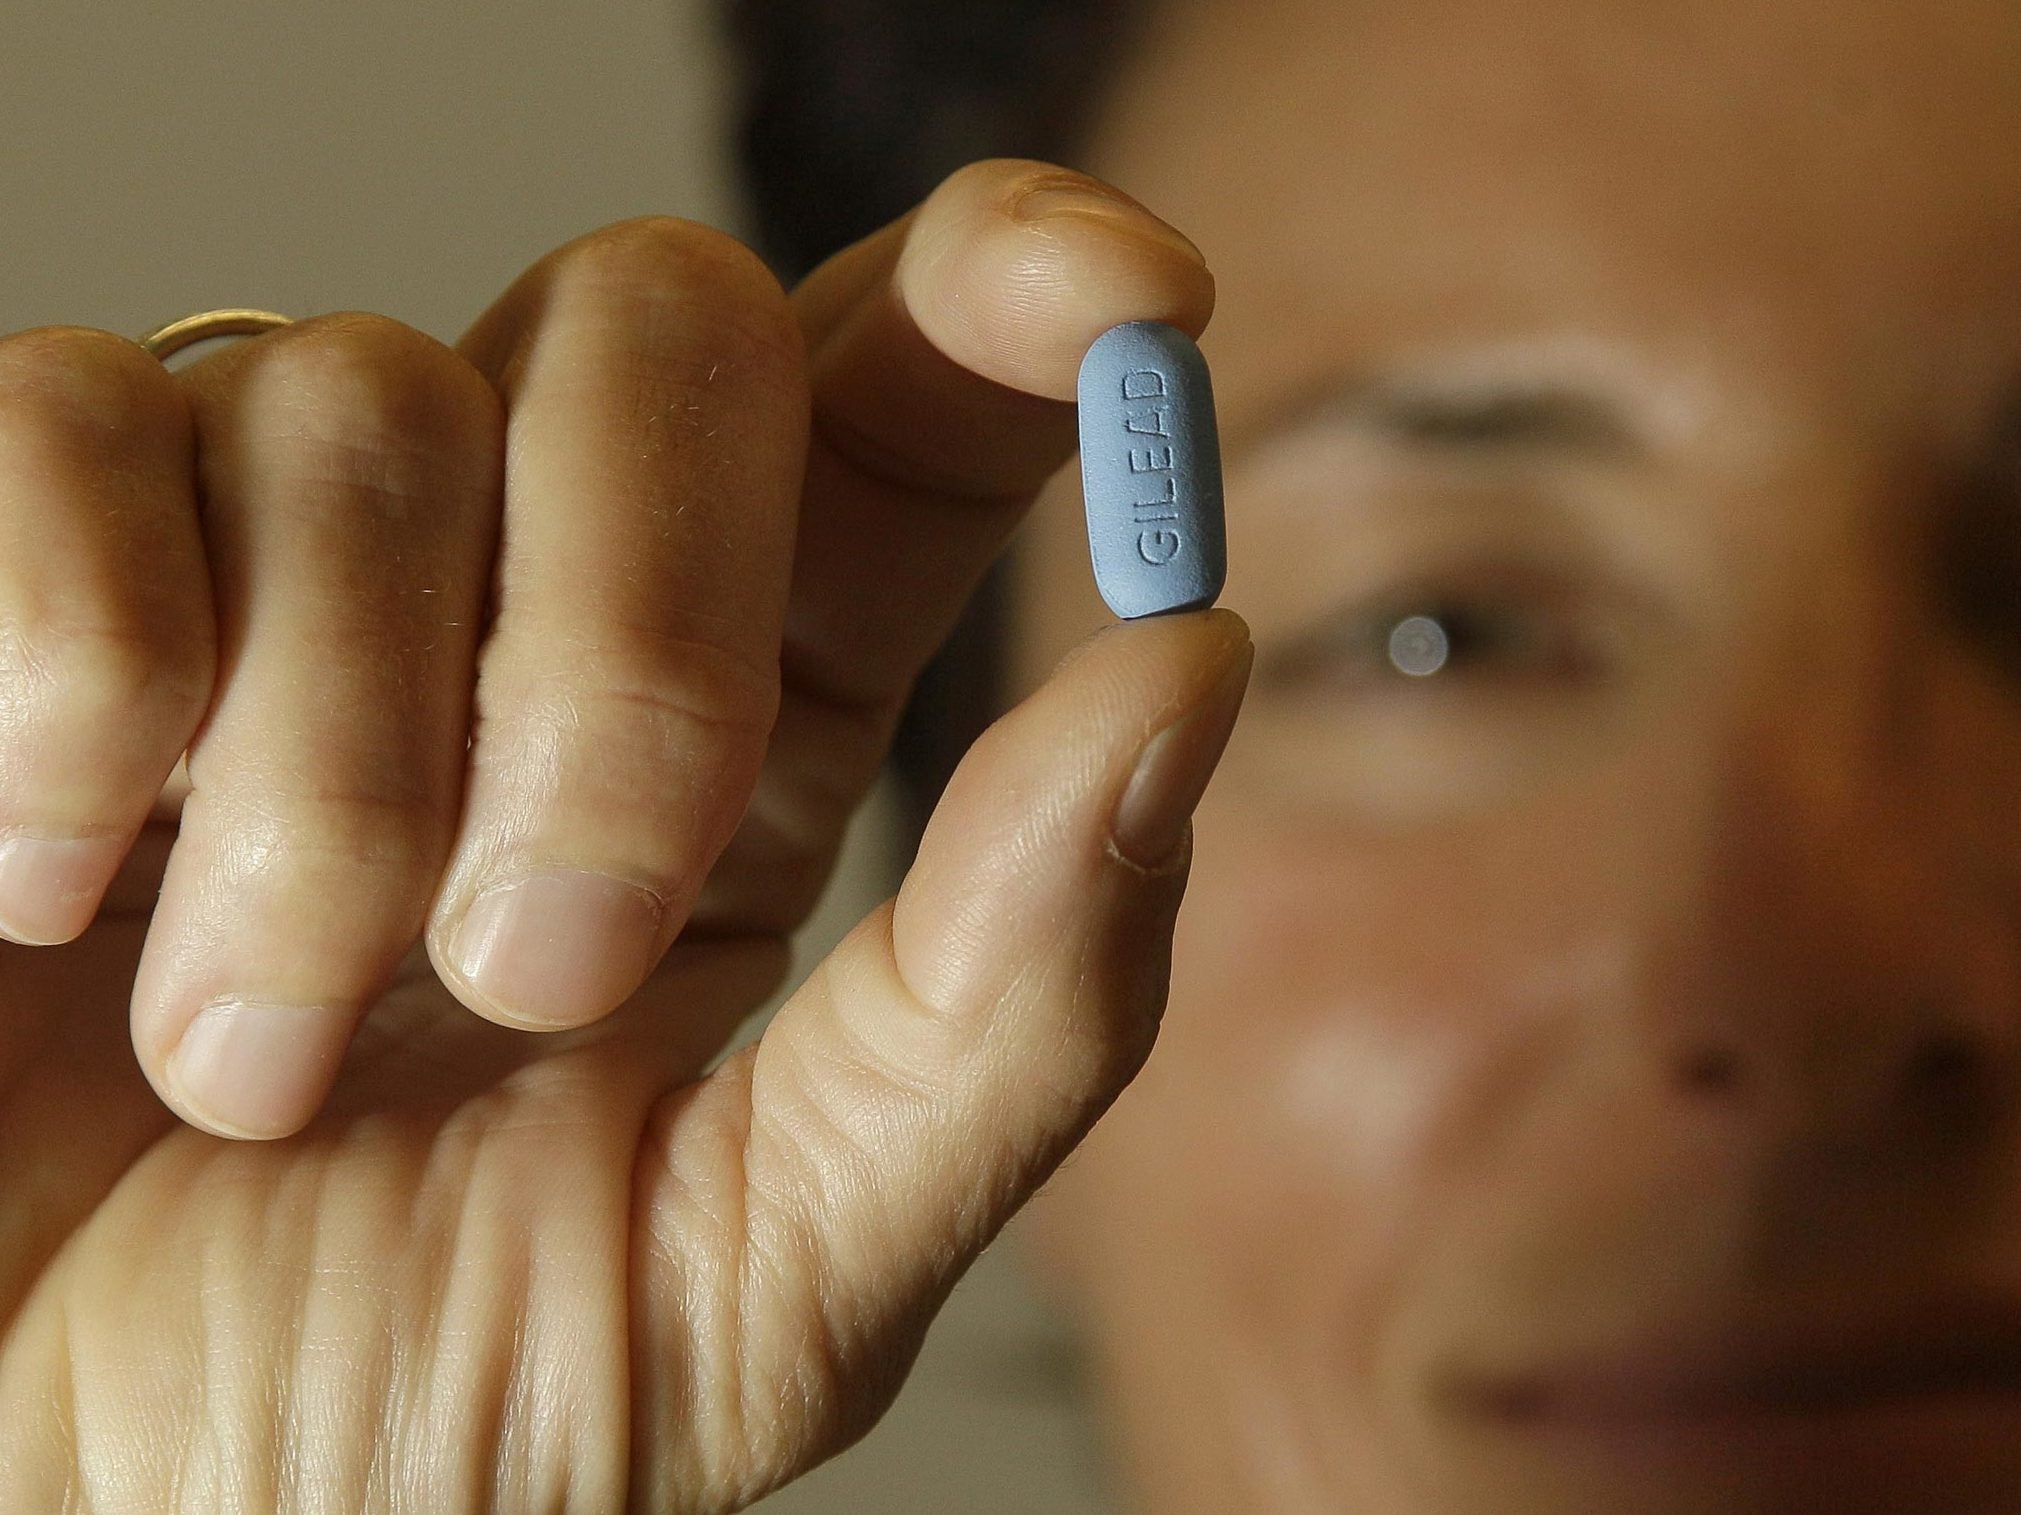 Truvada is already used in the UK as part of combination therapy for people already infected with HIV, but is not approved for use as a preventative measure